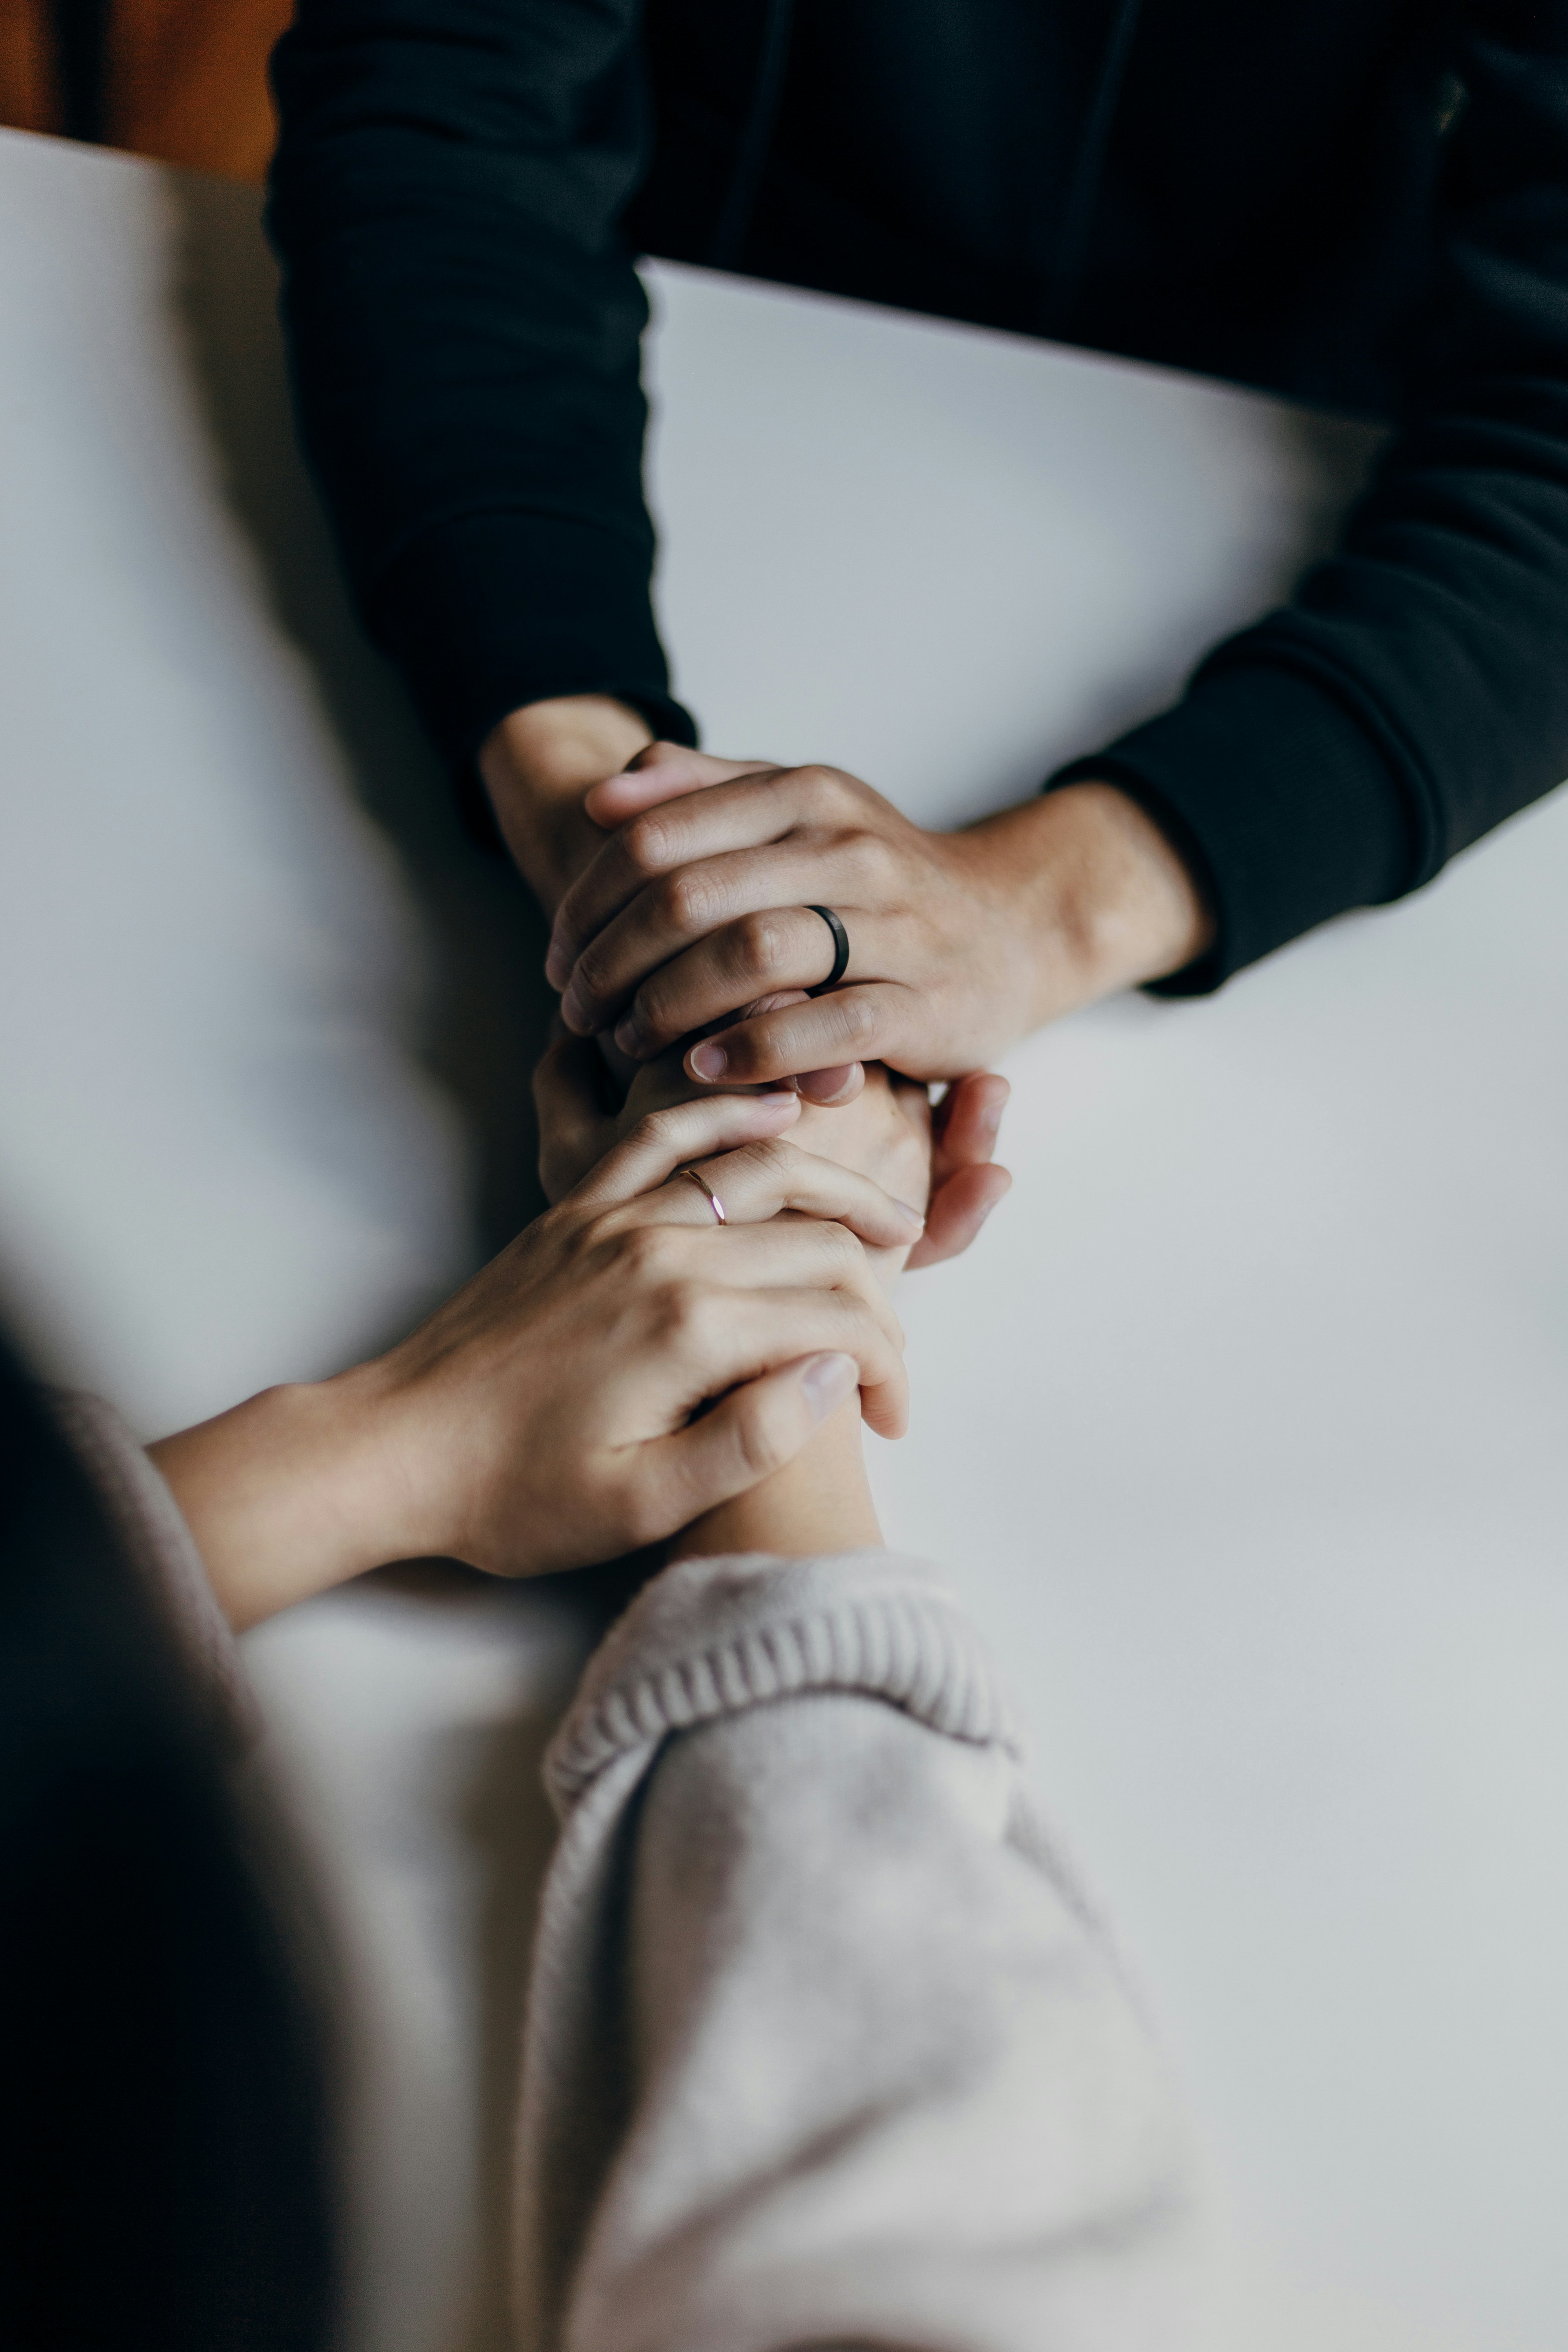 Two people holding hands | Source: Pexels